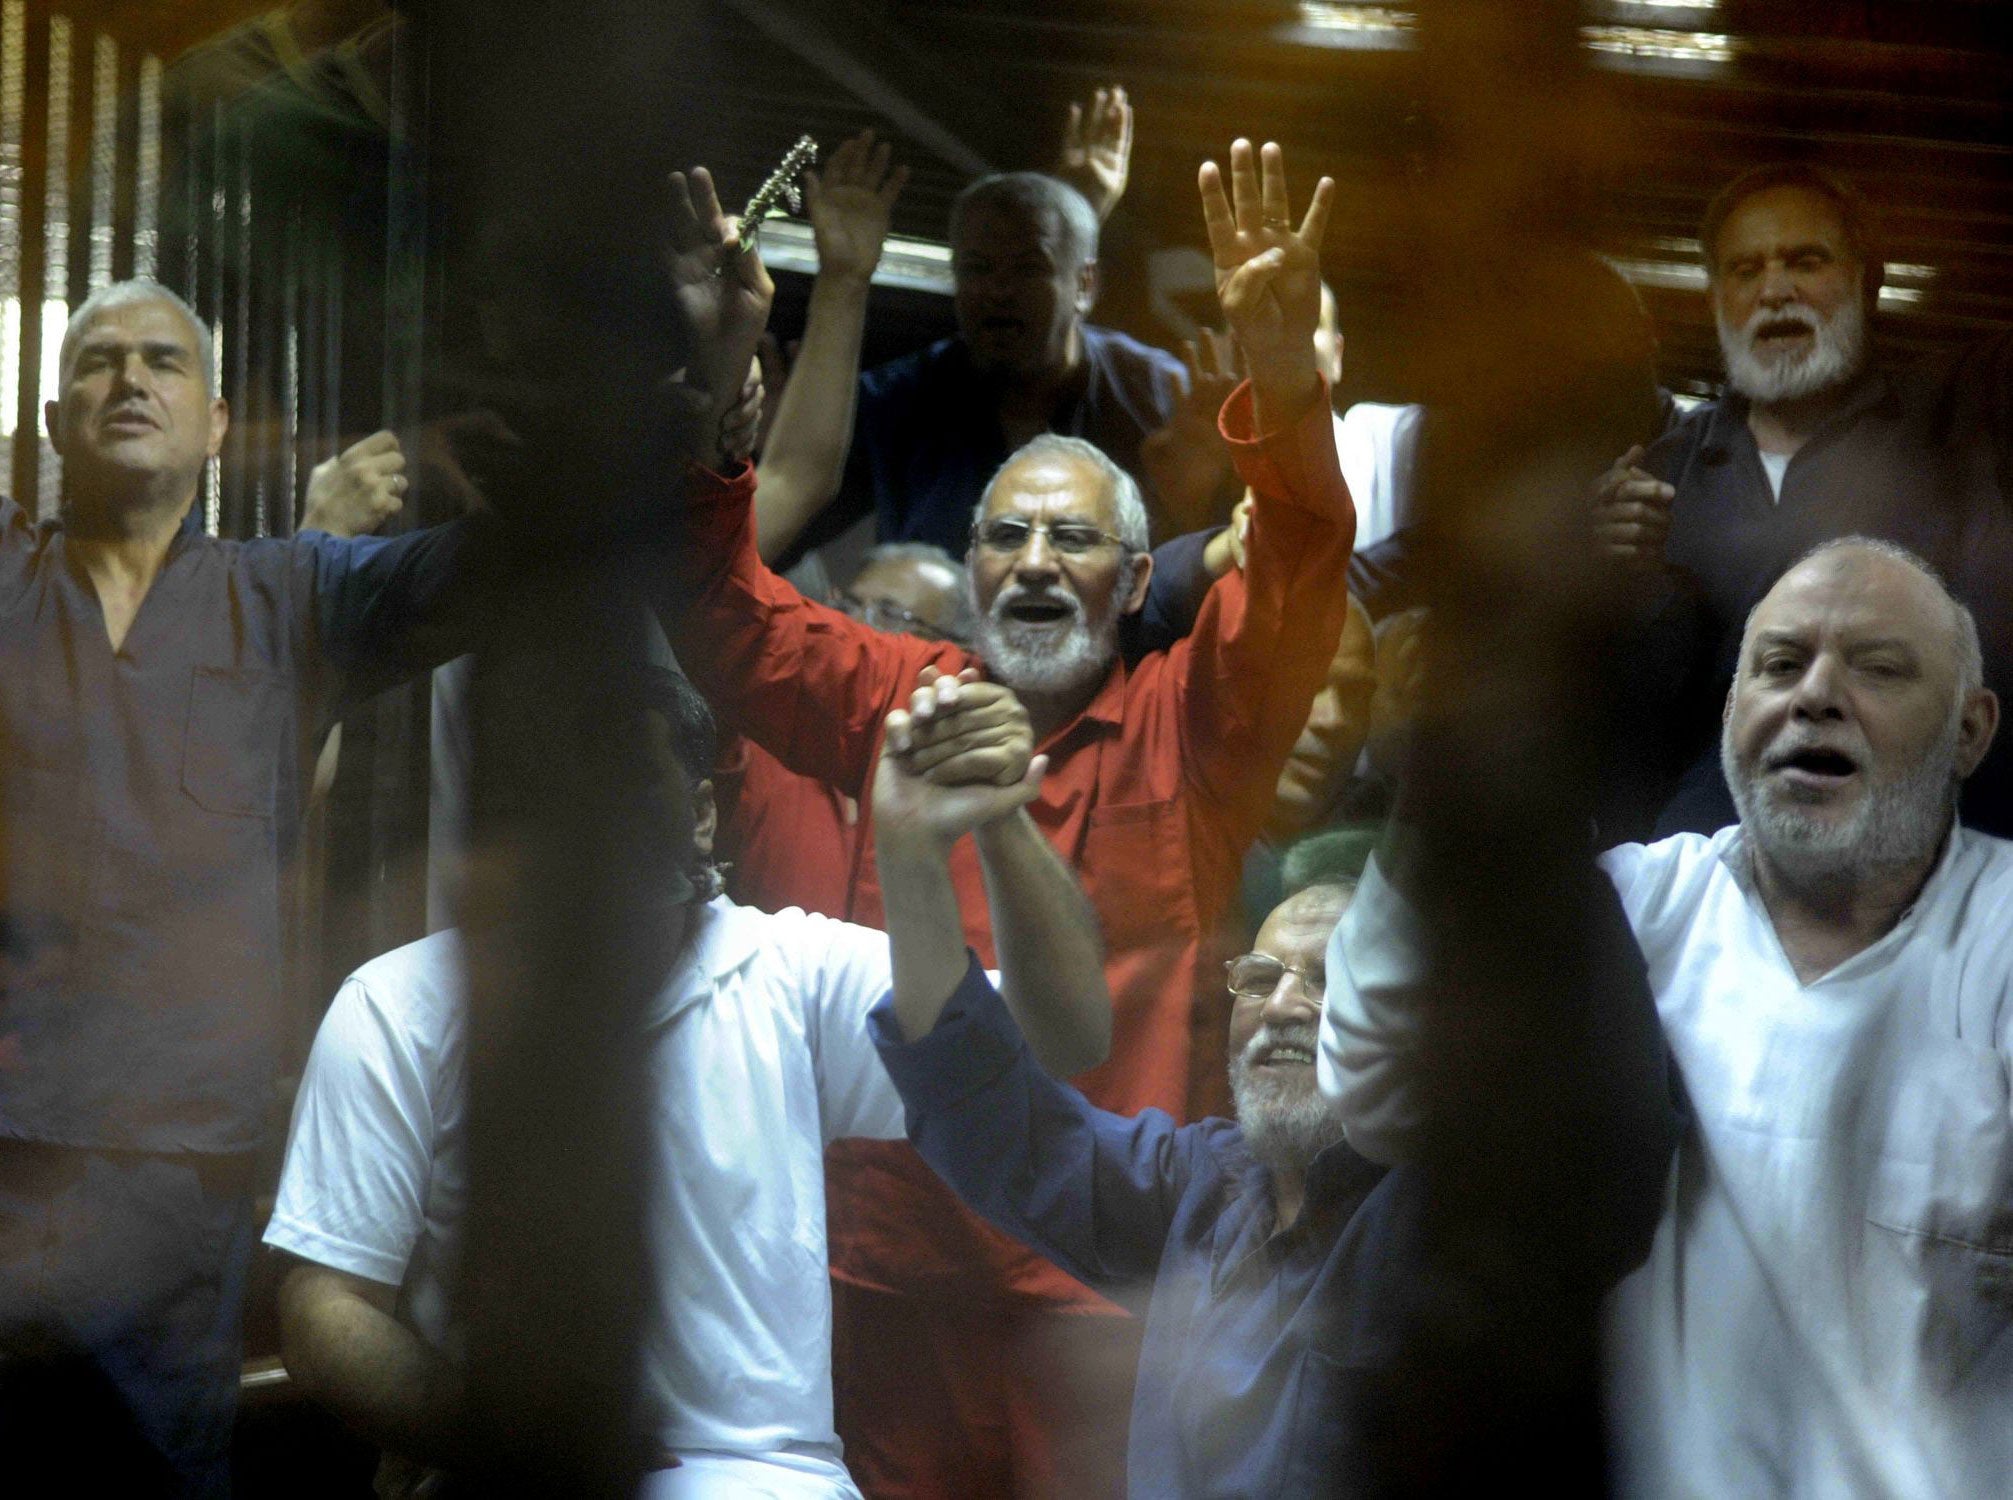 Egyptian defendants including the spiritual leader of the Muslim Brotherhood, Mohammed Badie, gesture as they are sentenced to death in a Cairo court